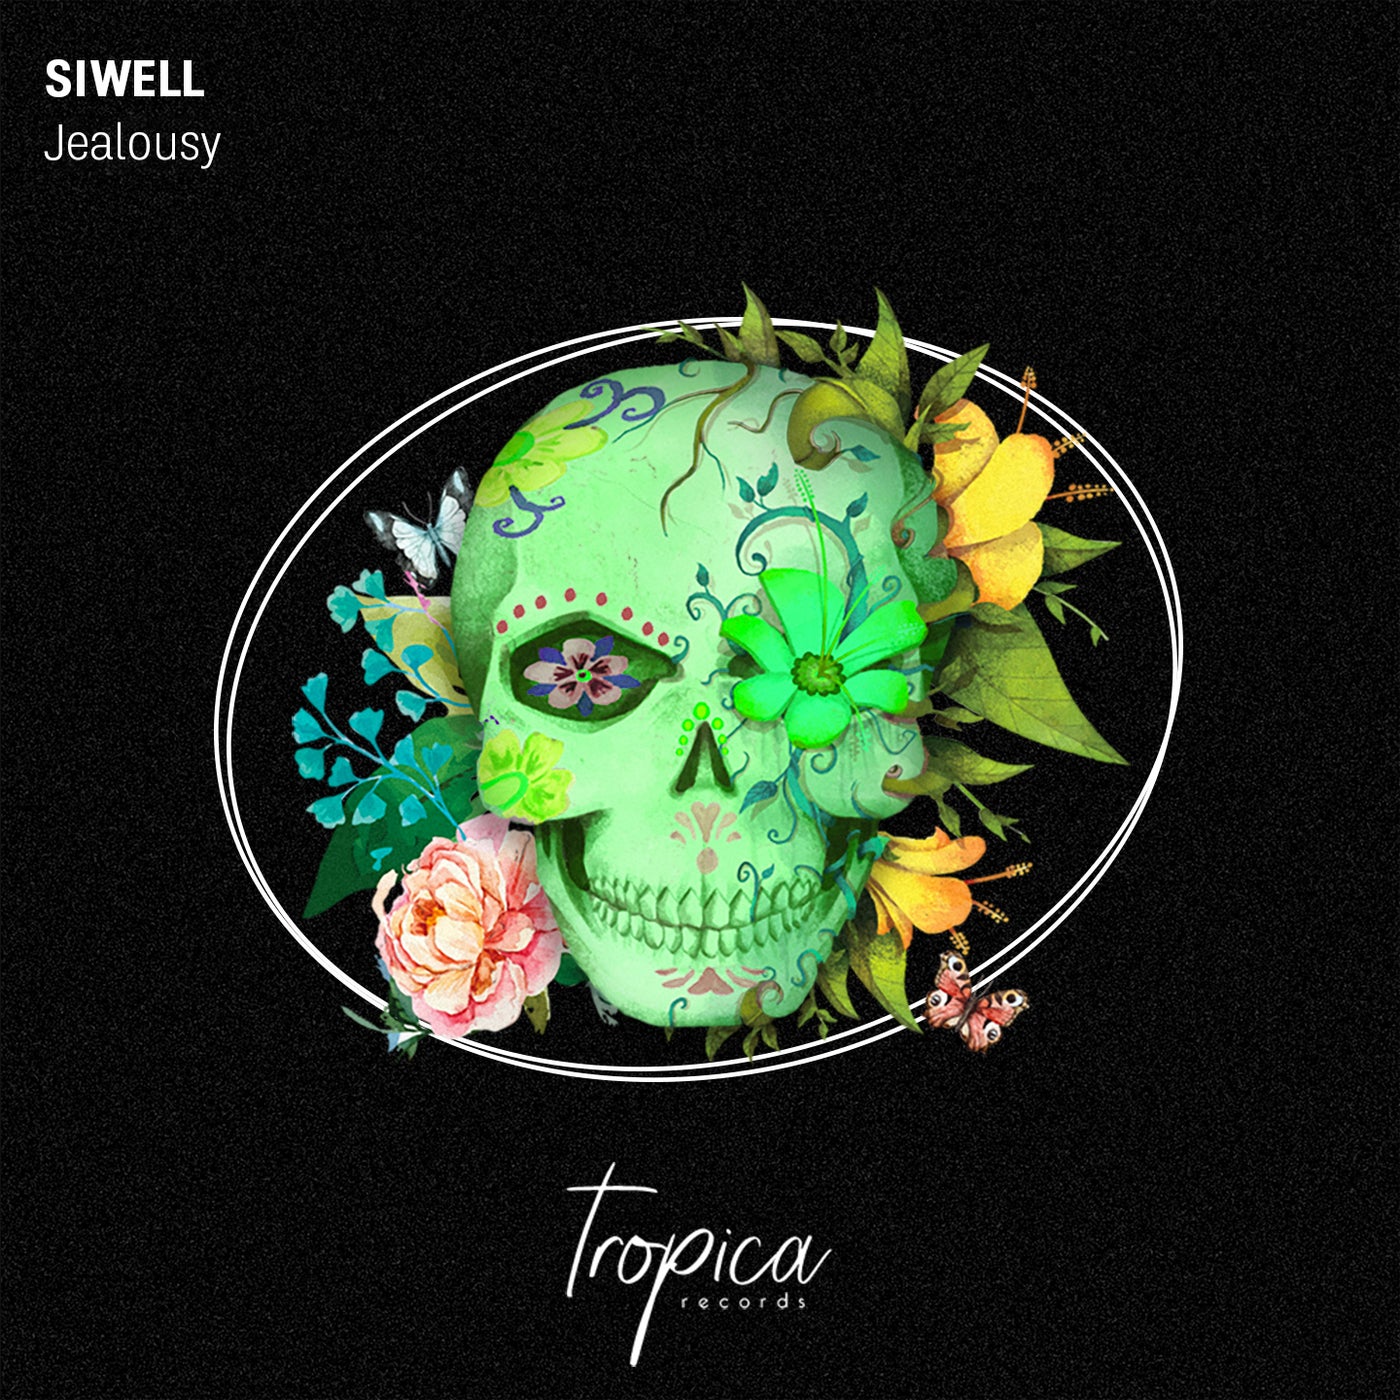 image cover: Siwell - Jealousy on TROPICA RECORDS